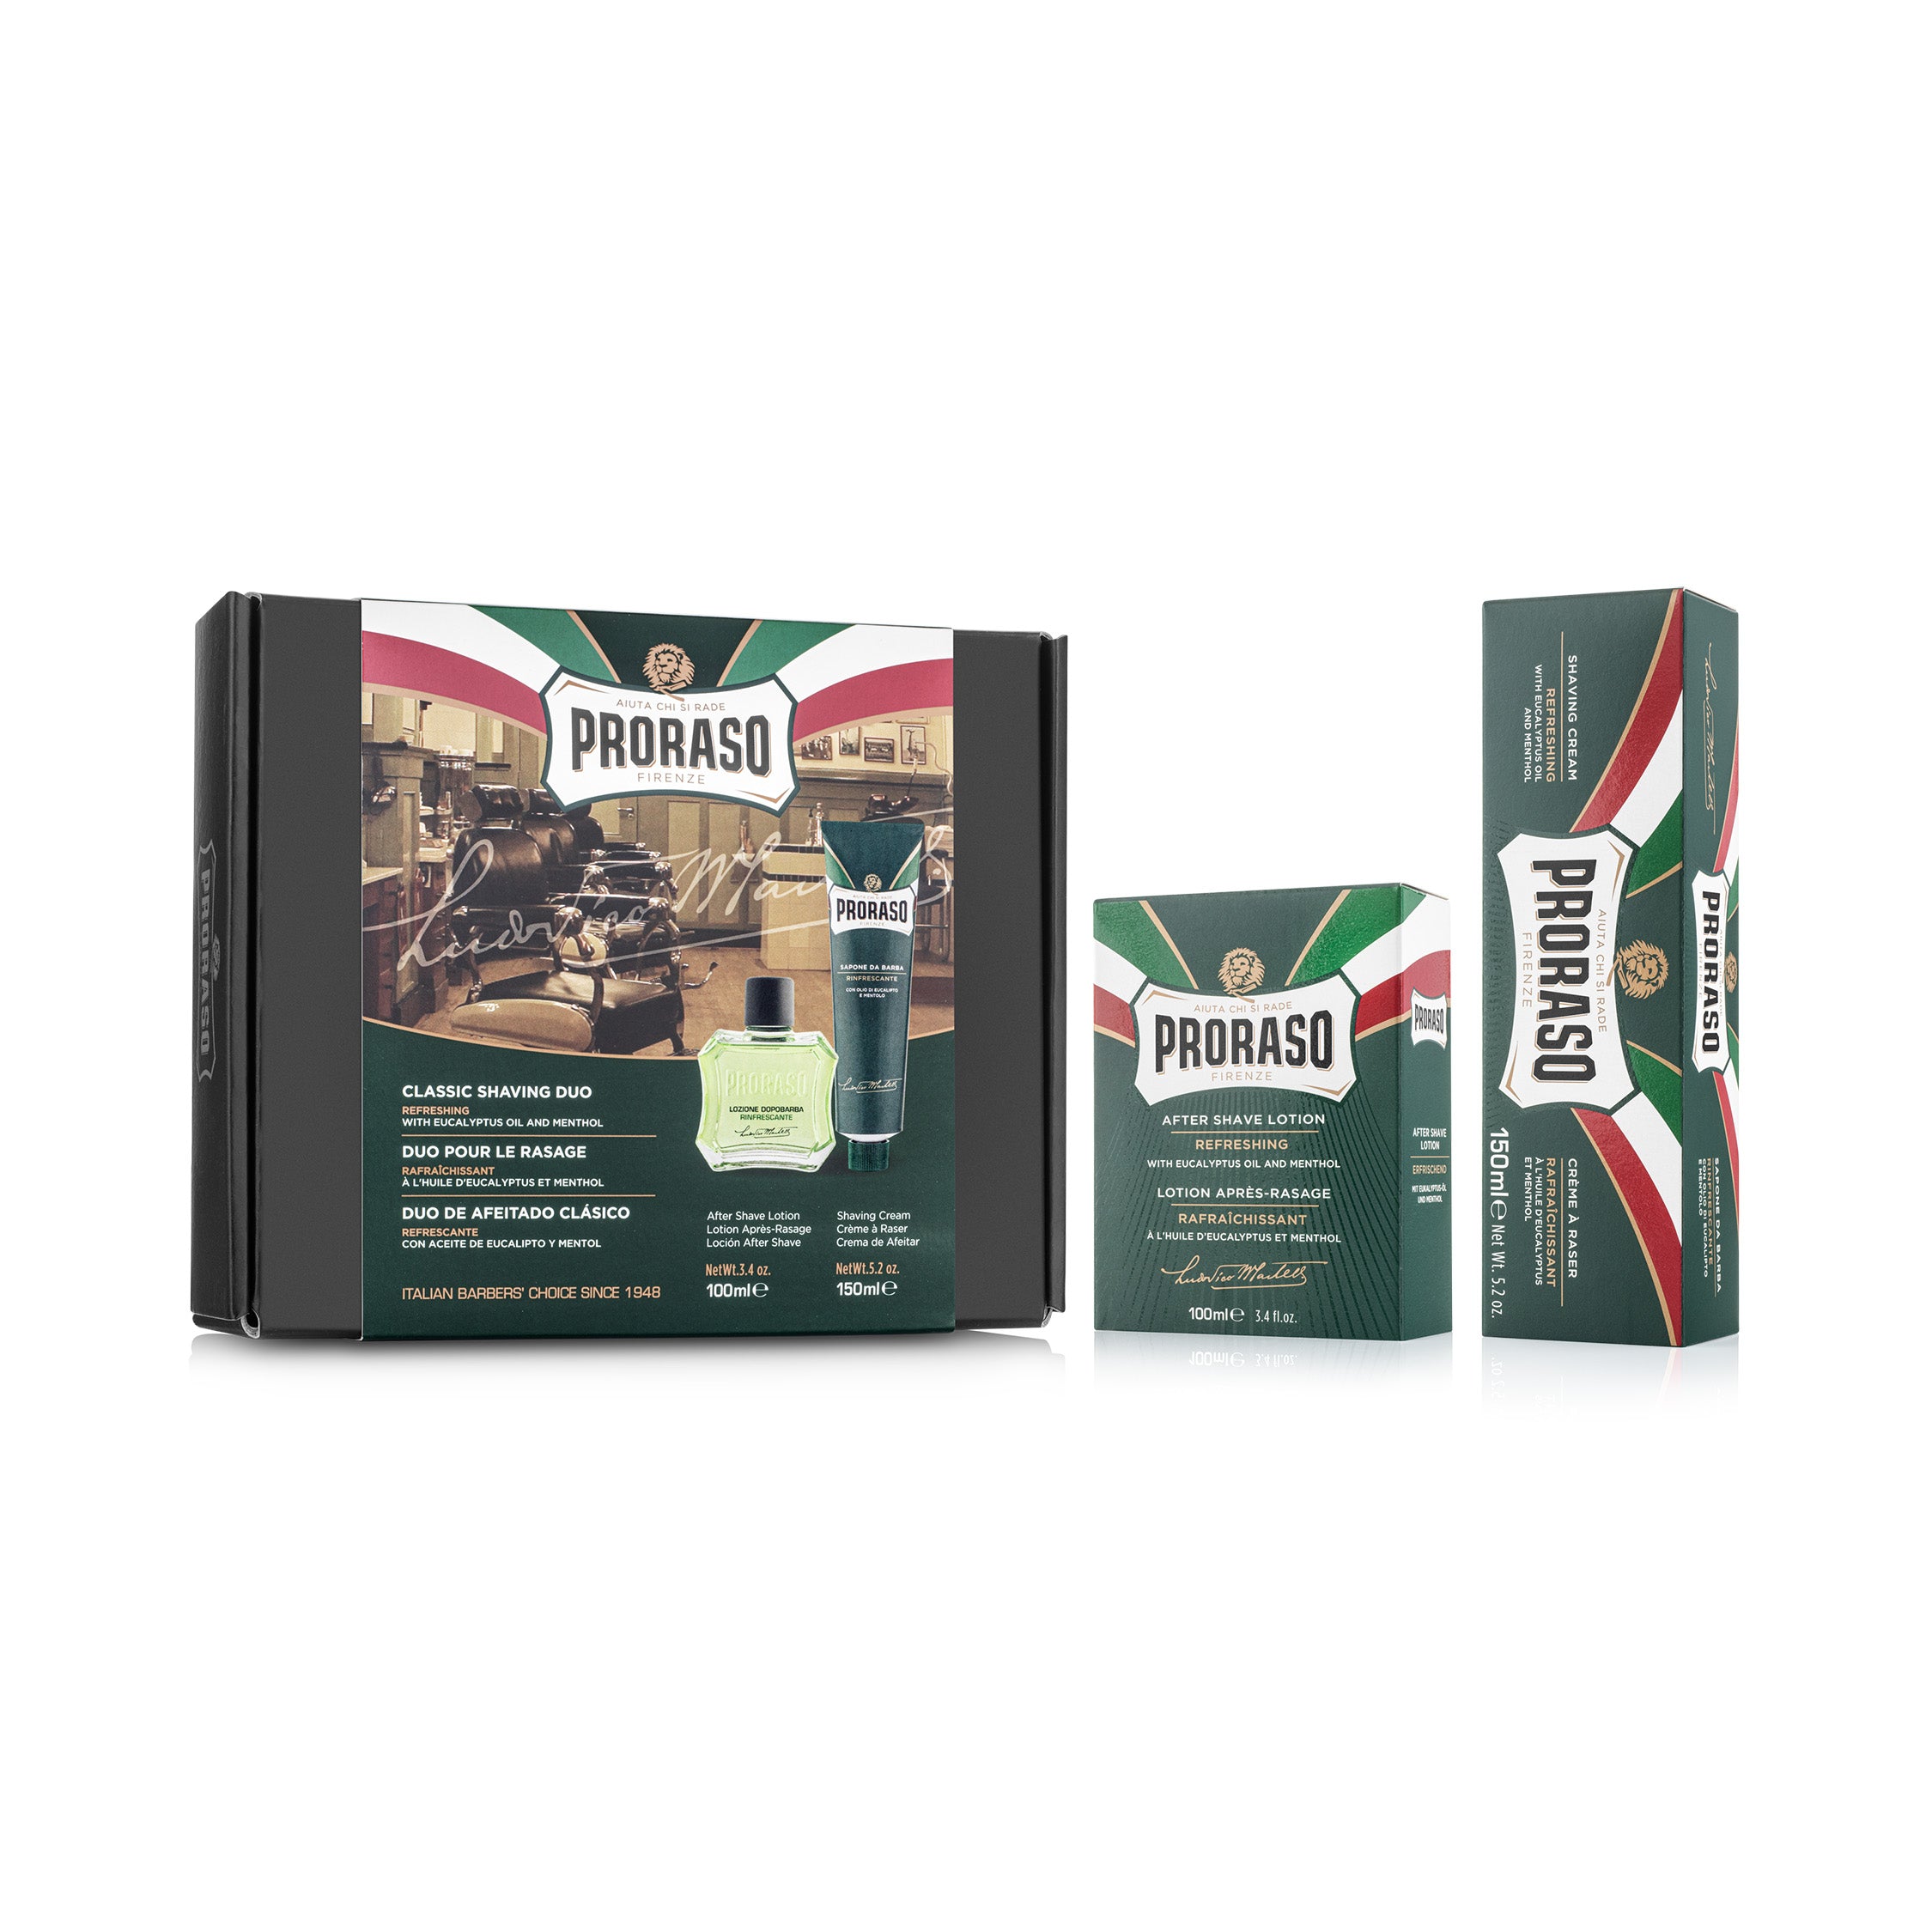 Proraso "Refresh" DUO Parranajovoide ja aftershave lotion